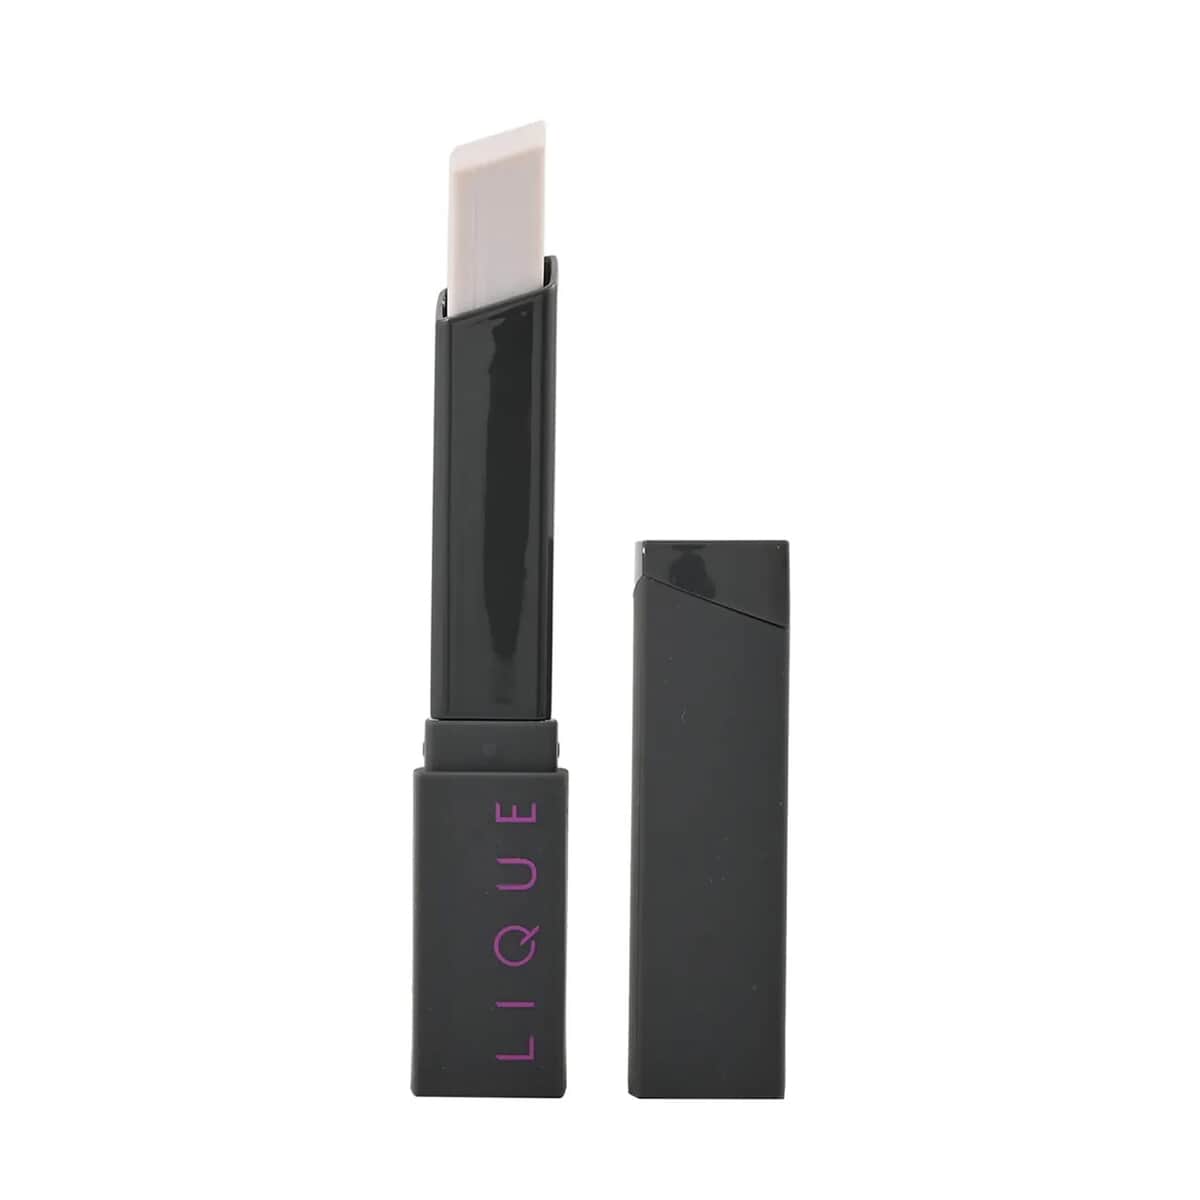 Closeout Lique Set of 2 (One Lipstick & One Effect Powder) with Free Set of 2 (One Lipstick & One Effect Powder) image number 4